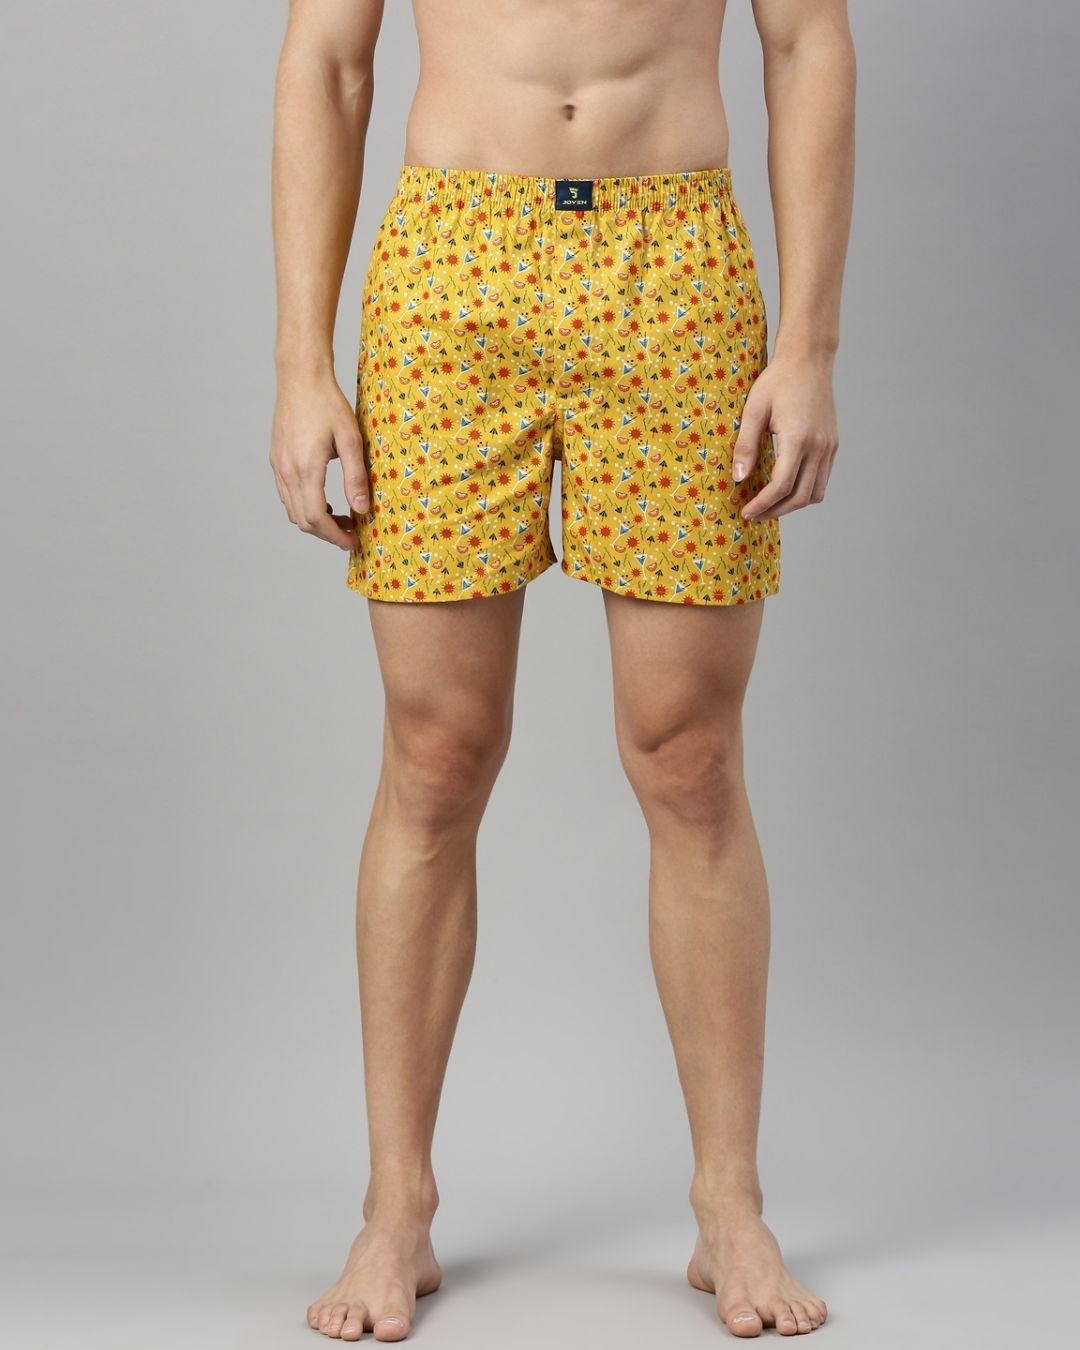 Buy Men's All Over Printed Cotton Boxers (Pack of 3) Online in India at ...